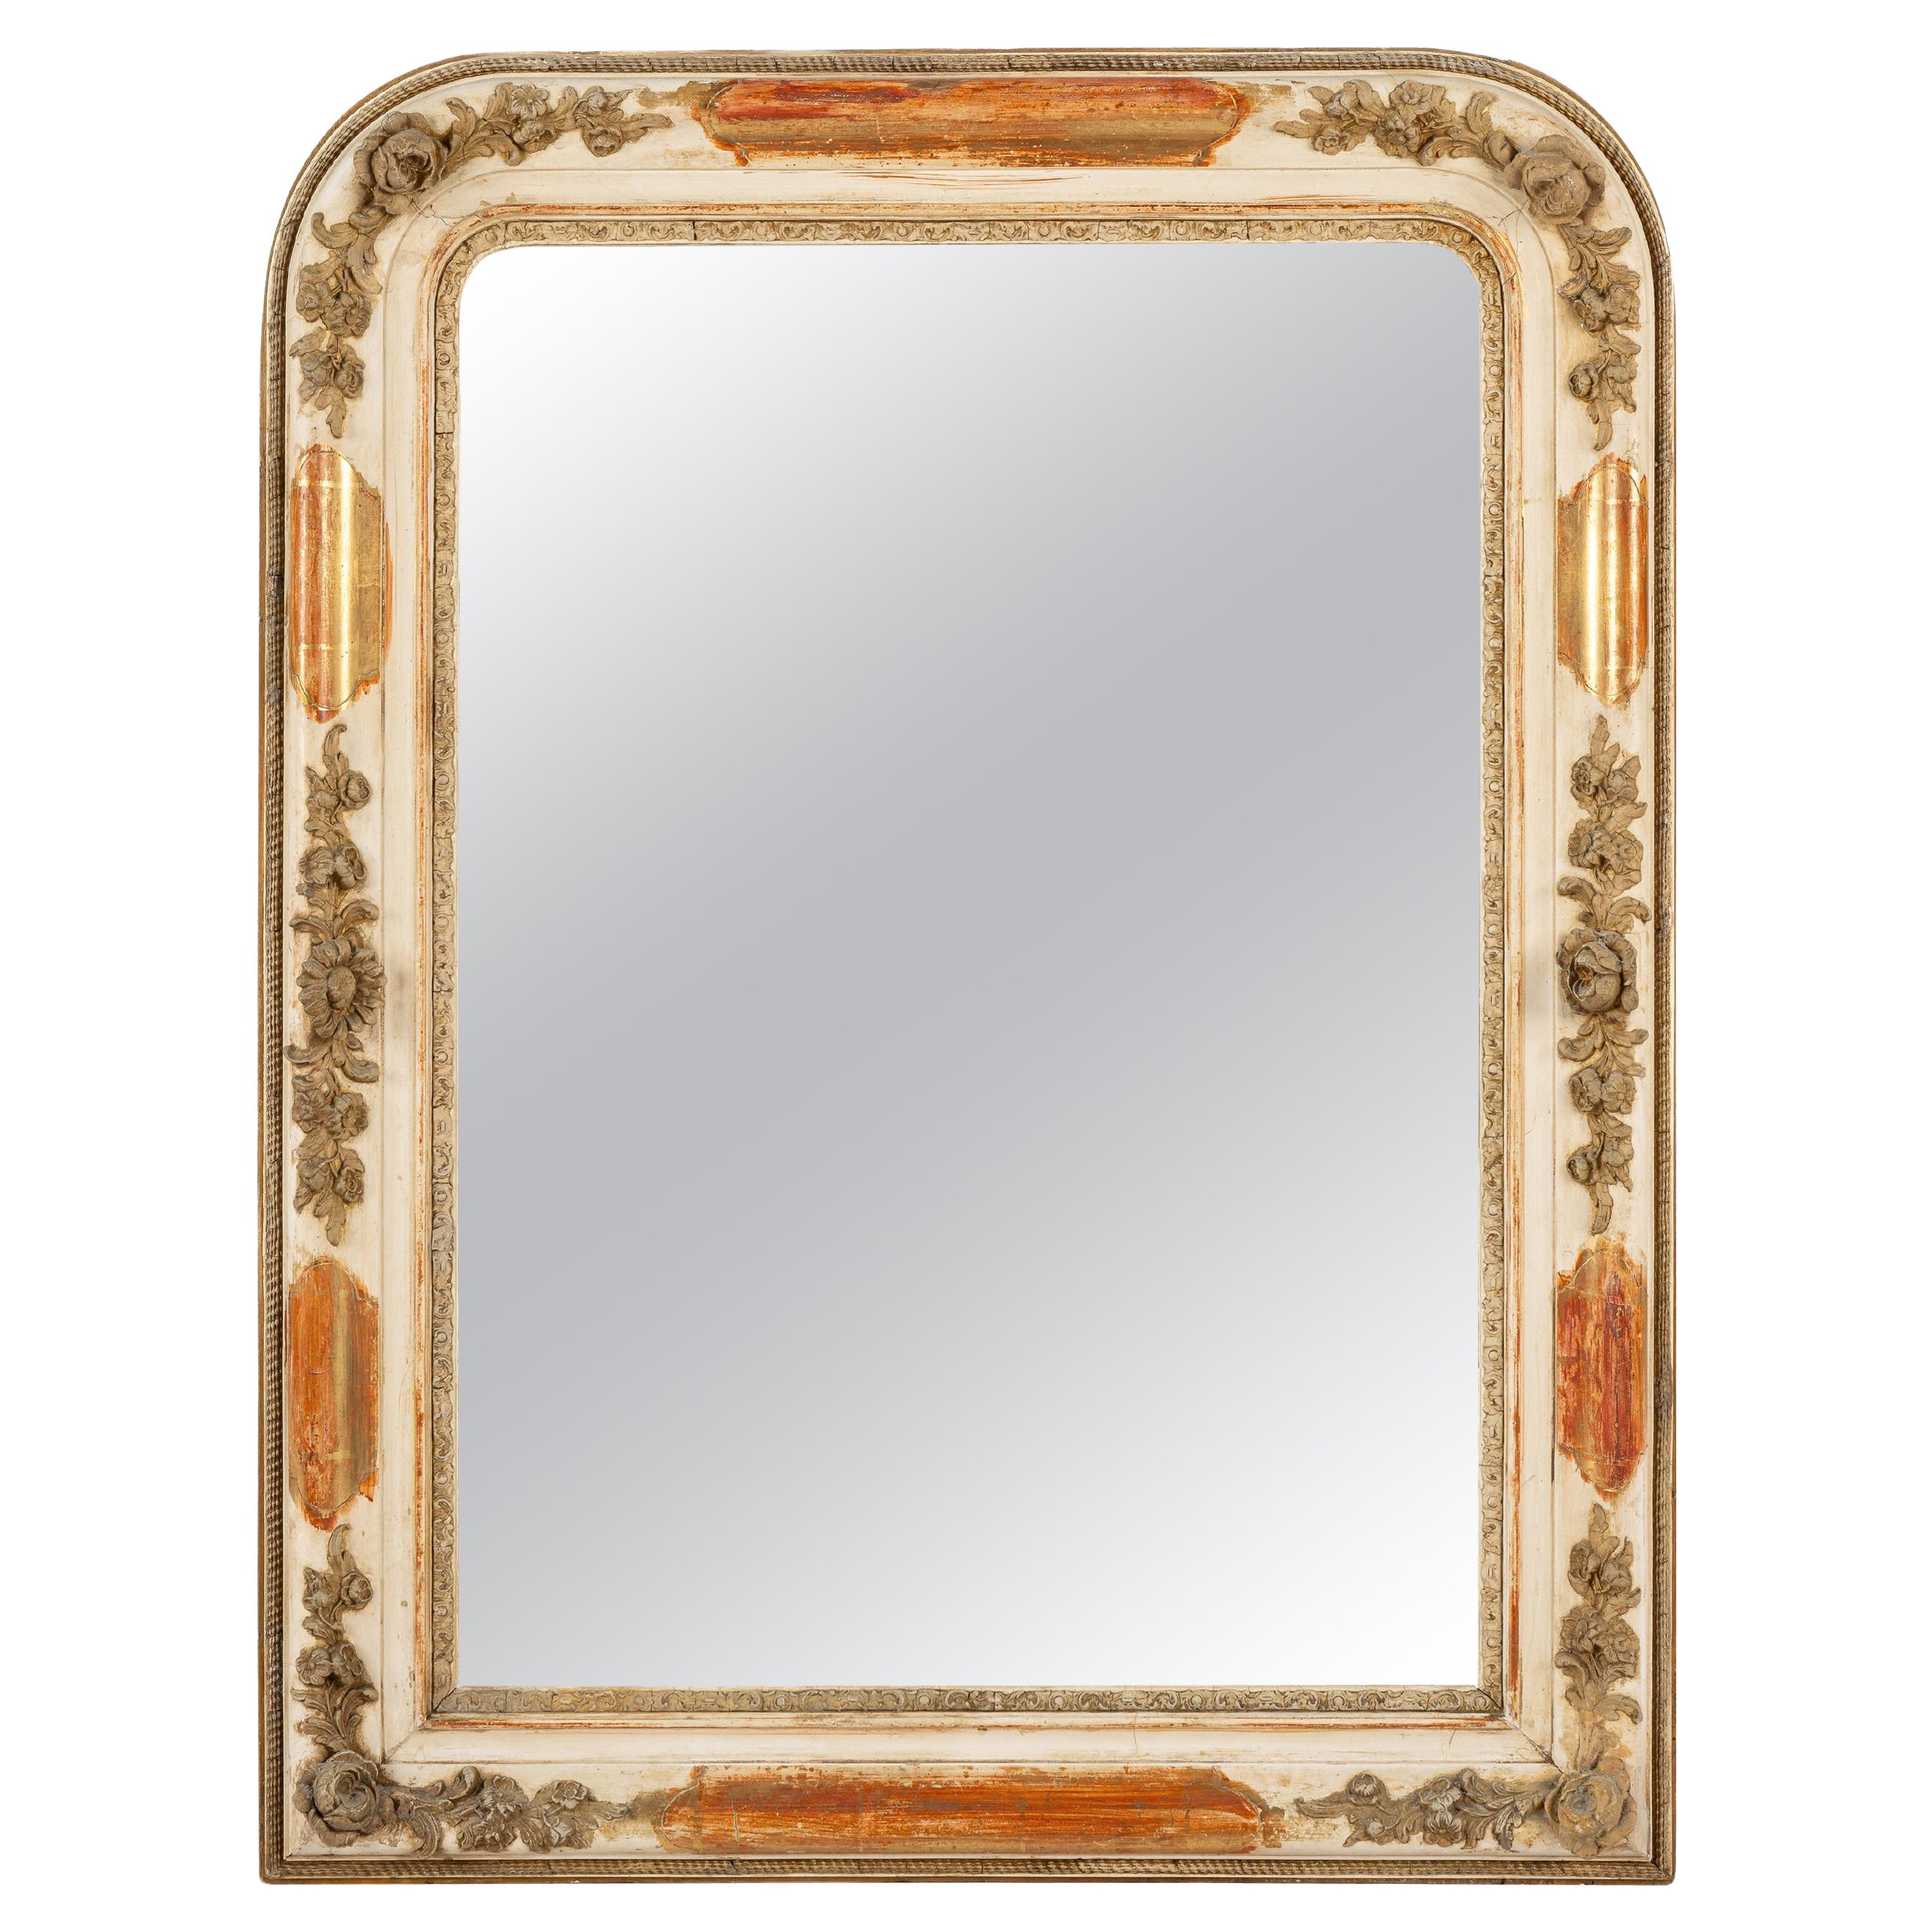  Antique mid 19th century faded gold gilt Frech Louis Philippe mantel mirror For Sale